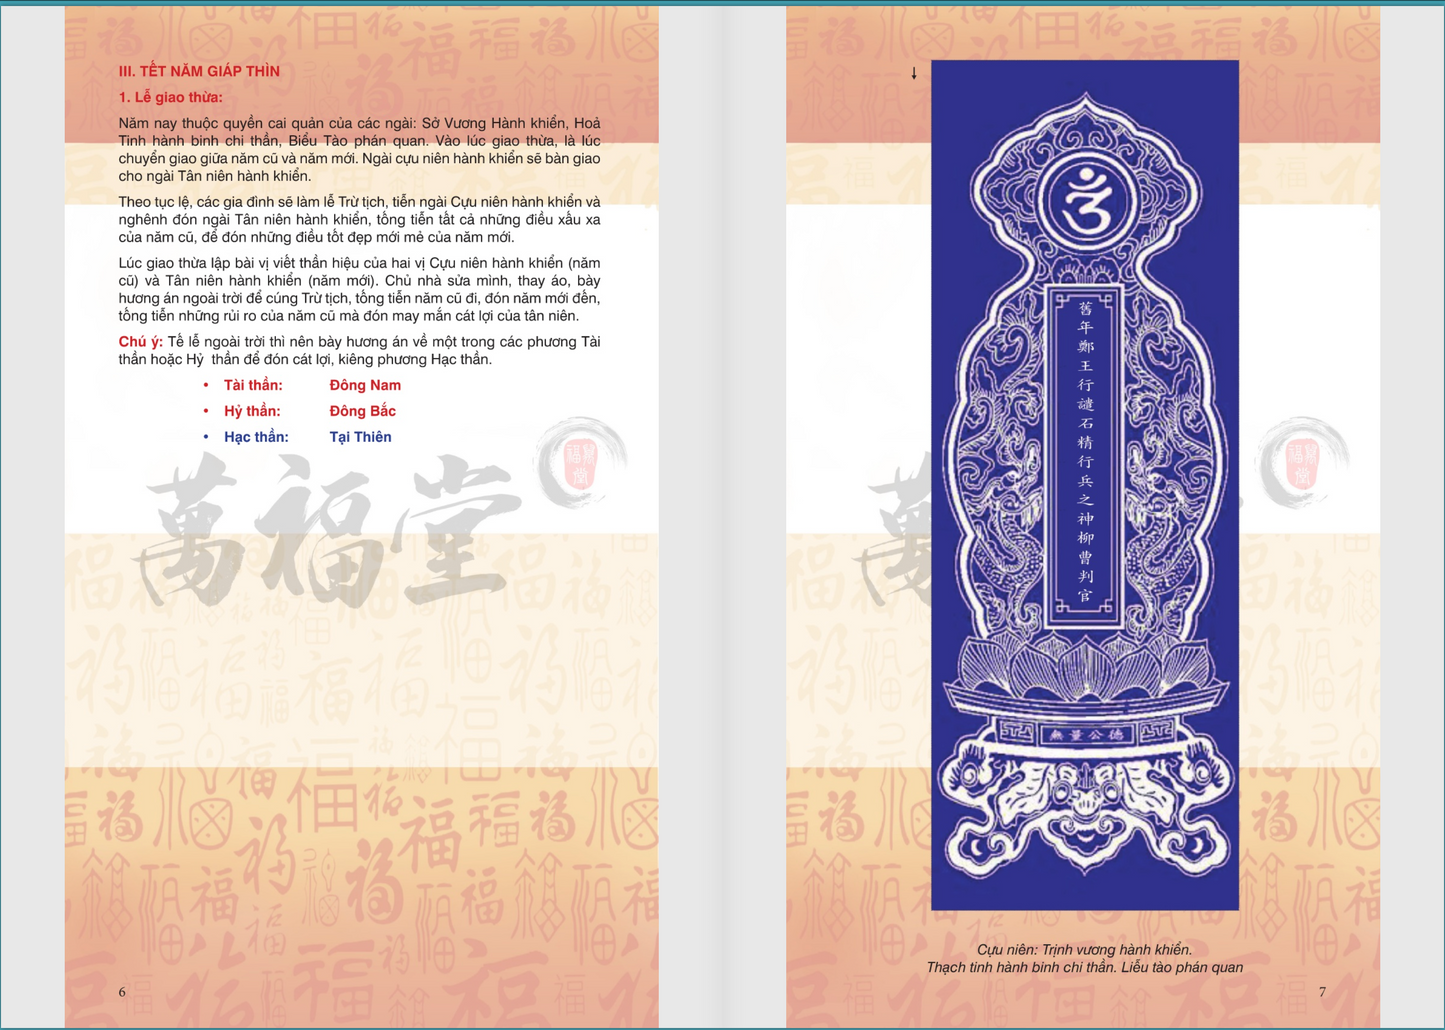 Lịch Trạch cát dụng sự - The 2024 Almanac for Auspicious Architectural and Cultural Practices by the Institute for Research in Architecture and Eastern Culture